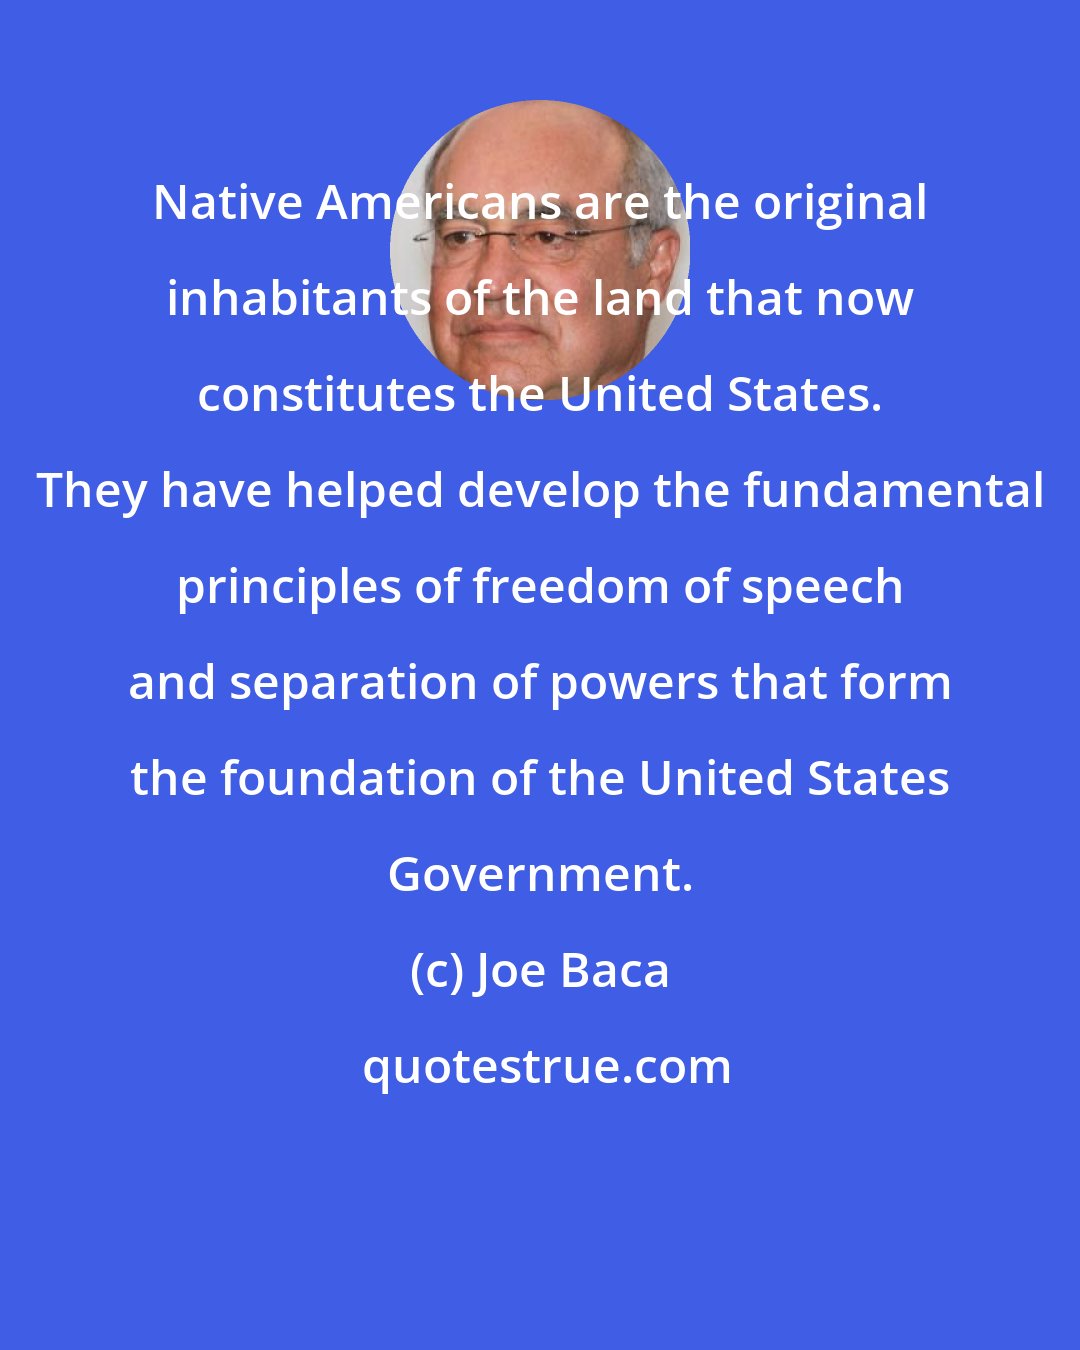 Joe Baca: Native Americans are the original inhabitants of the land that now constitutes the United States. They have helped develop the fundamental principles of freedom of speech and separation of powers that form the foundation of the United States Government.